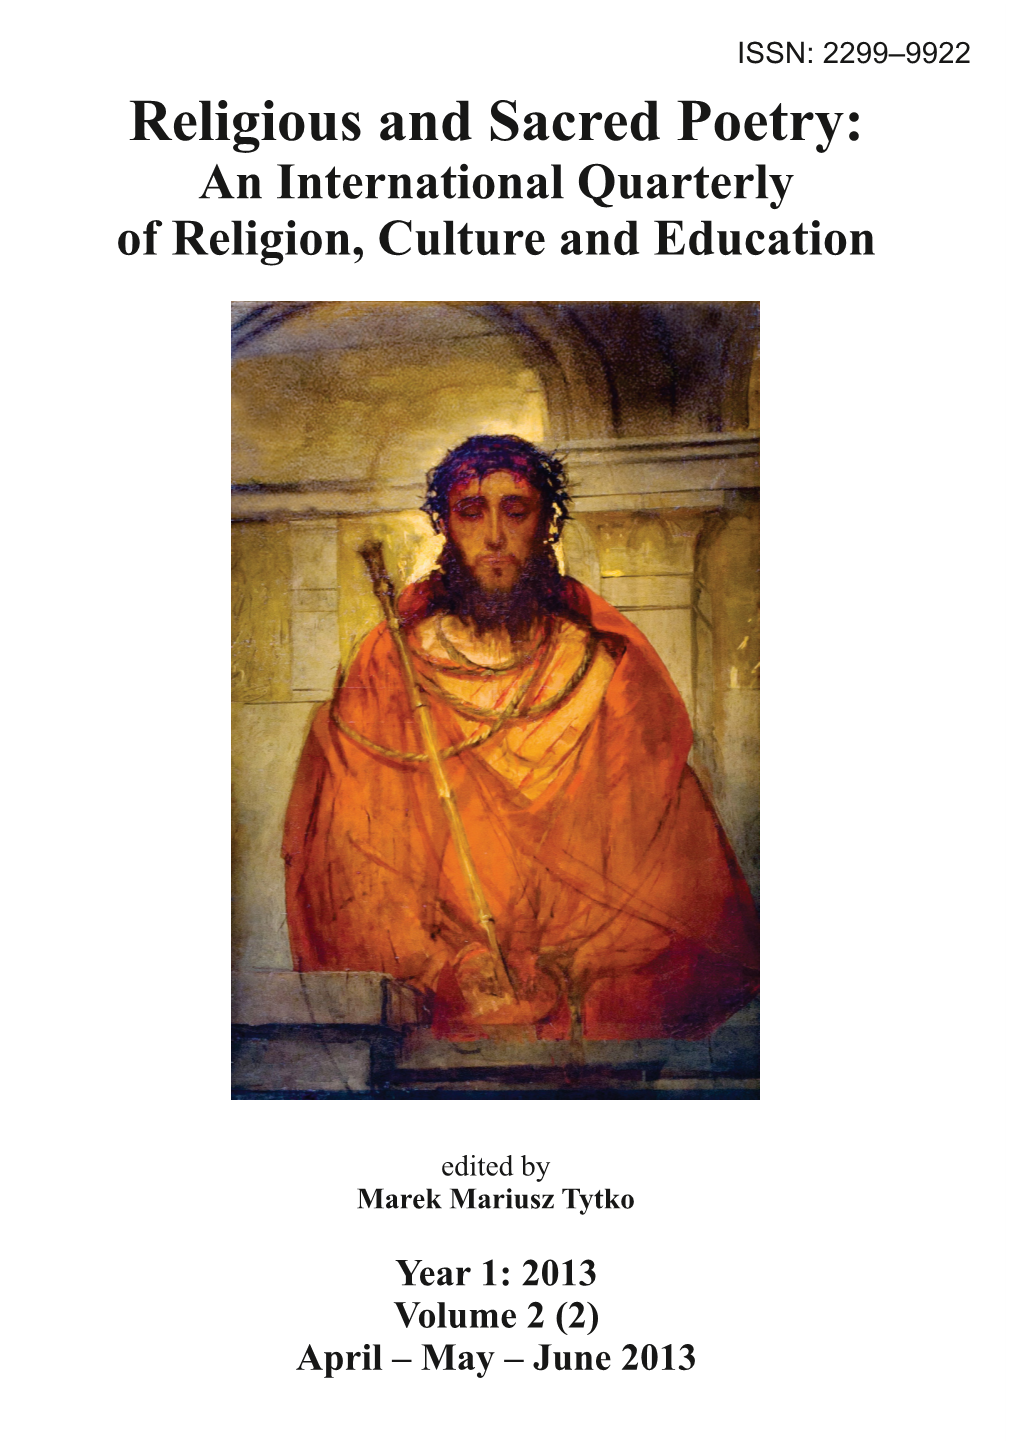 Religious and Sacred Poetry: an International Quarterly of Religion, Culture and Education’